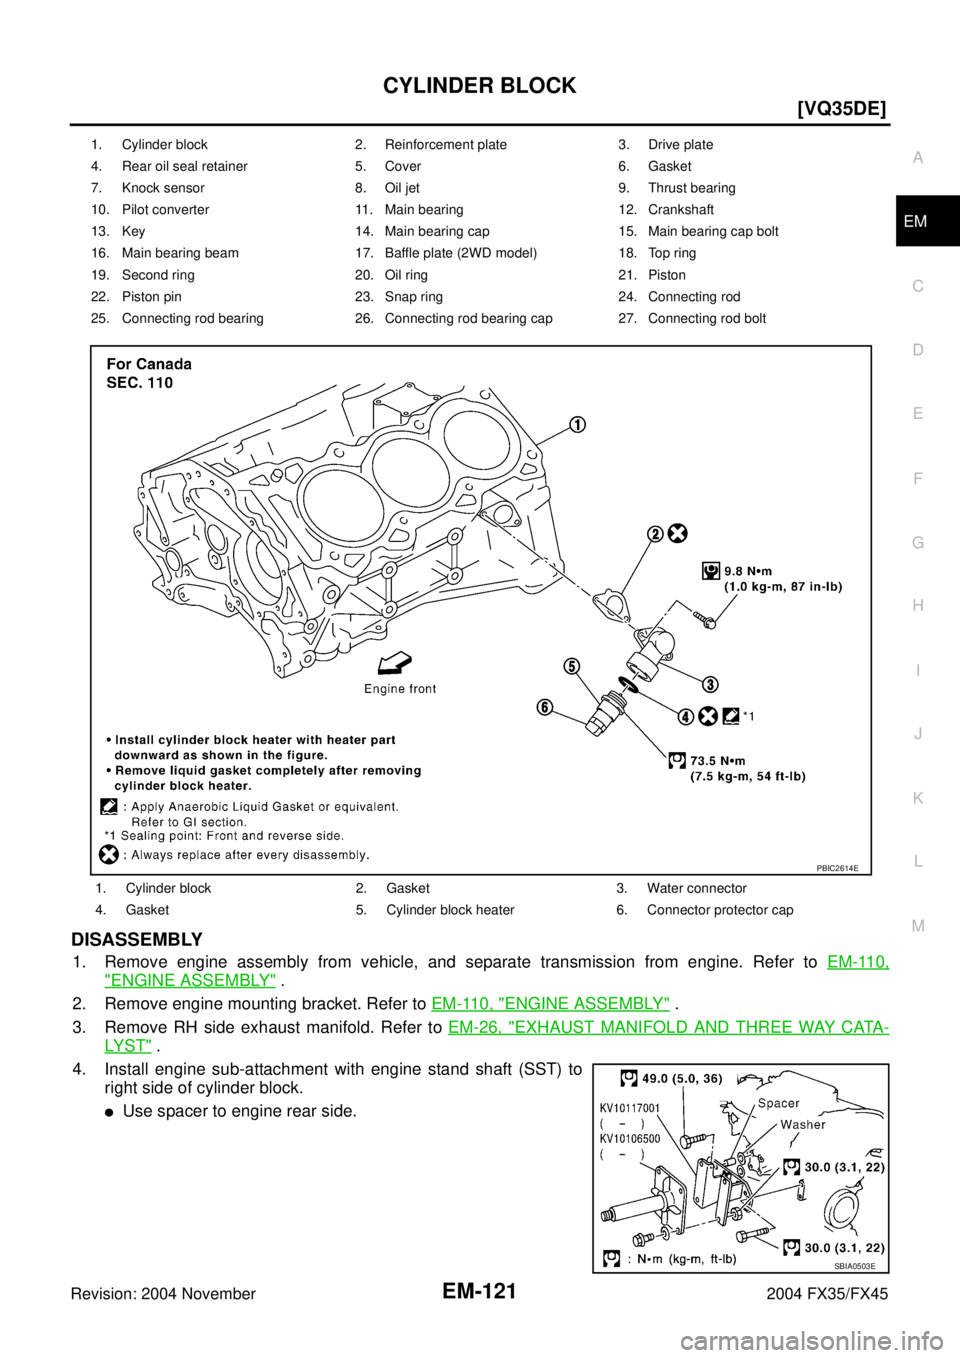 INFINITI FX35 2004  Service Manual CYLINDER BLOCK
EM-121
[VQ35DE]
C
D
E
F
G
H
I
J
K
L
MA
EM
Revision: 2004 November 2004 FX35/FX45
DISASSEMBLY
1. Remove engine assembly from vehicle, and separate transmission from engine. Refer to EM-1